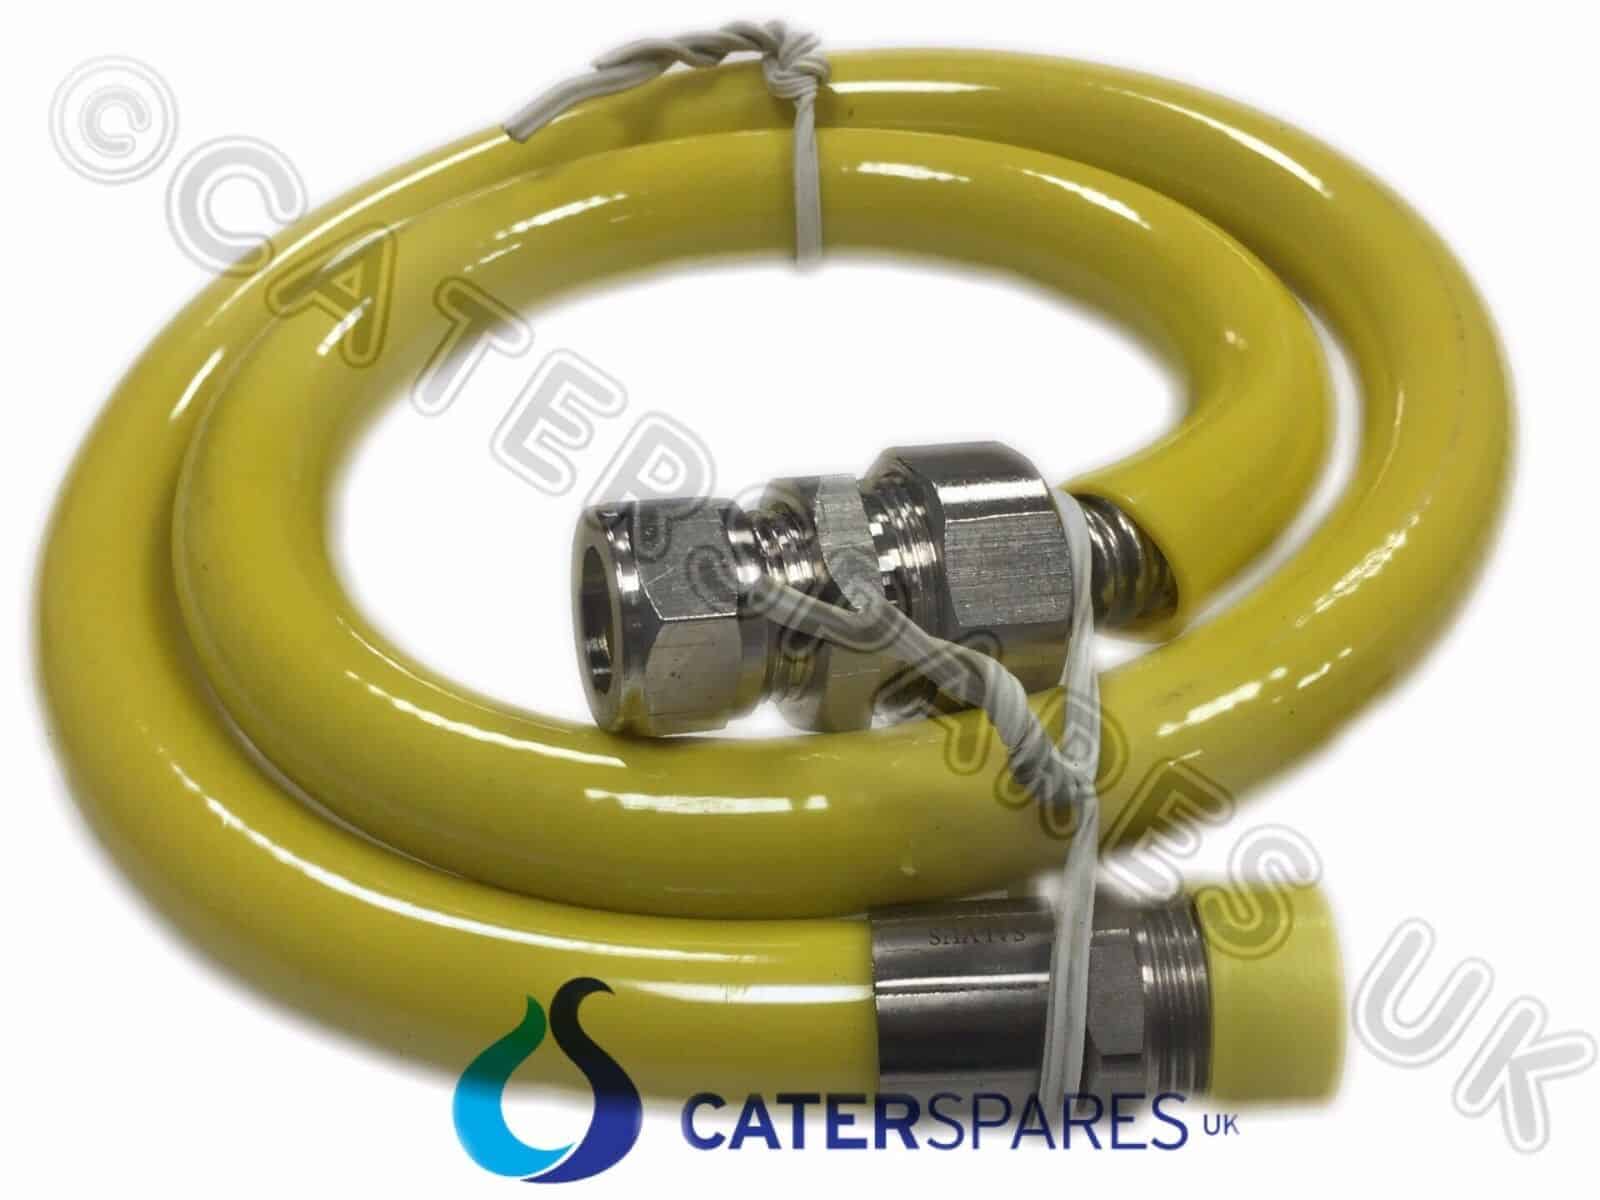 1/2" CATERHOSE COMMERCIAL CATERING YELLOW GAS HOSE FLEX BY 1000MM LONG 